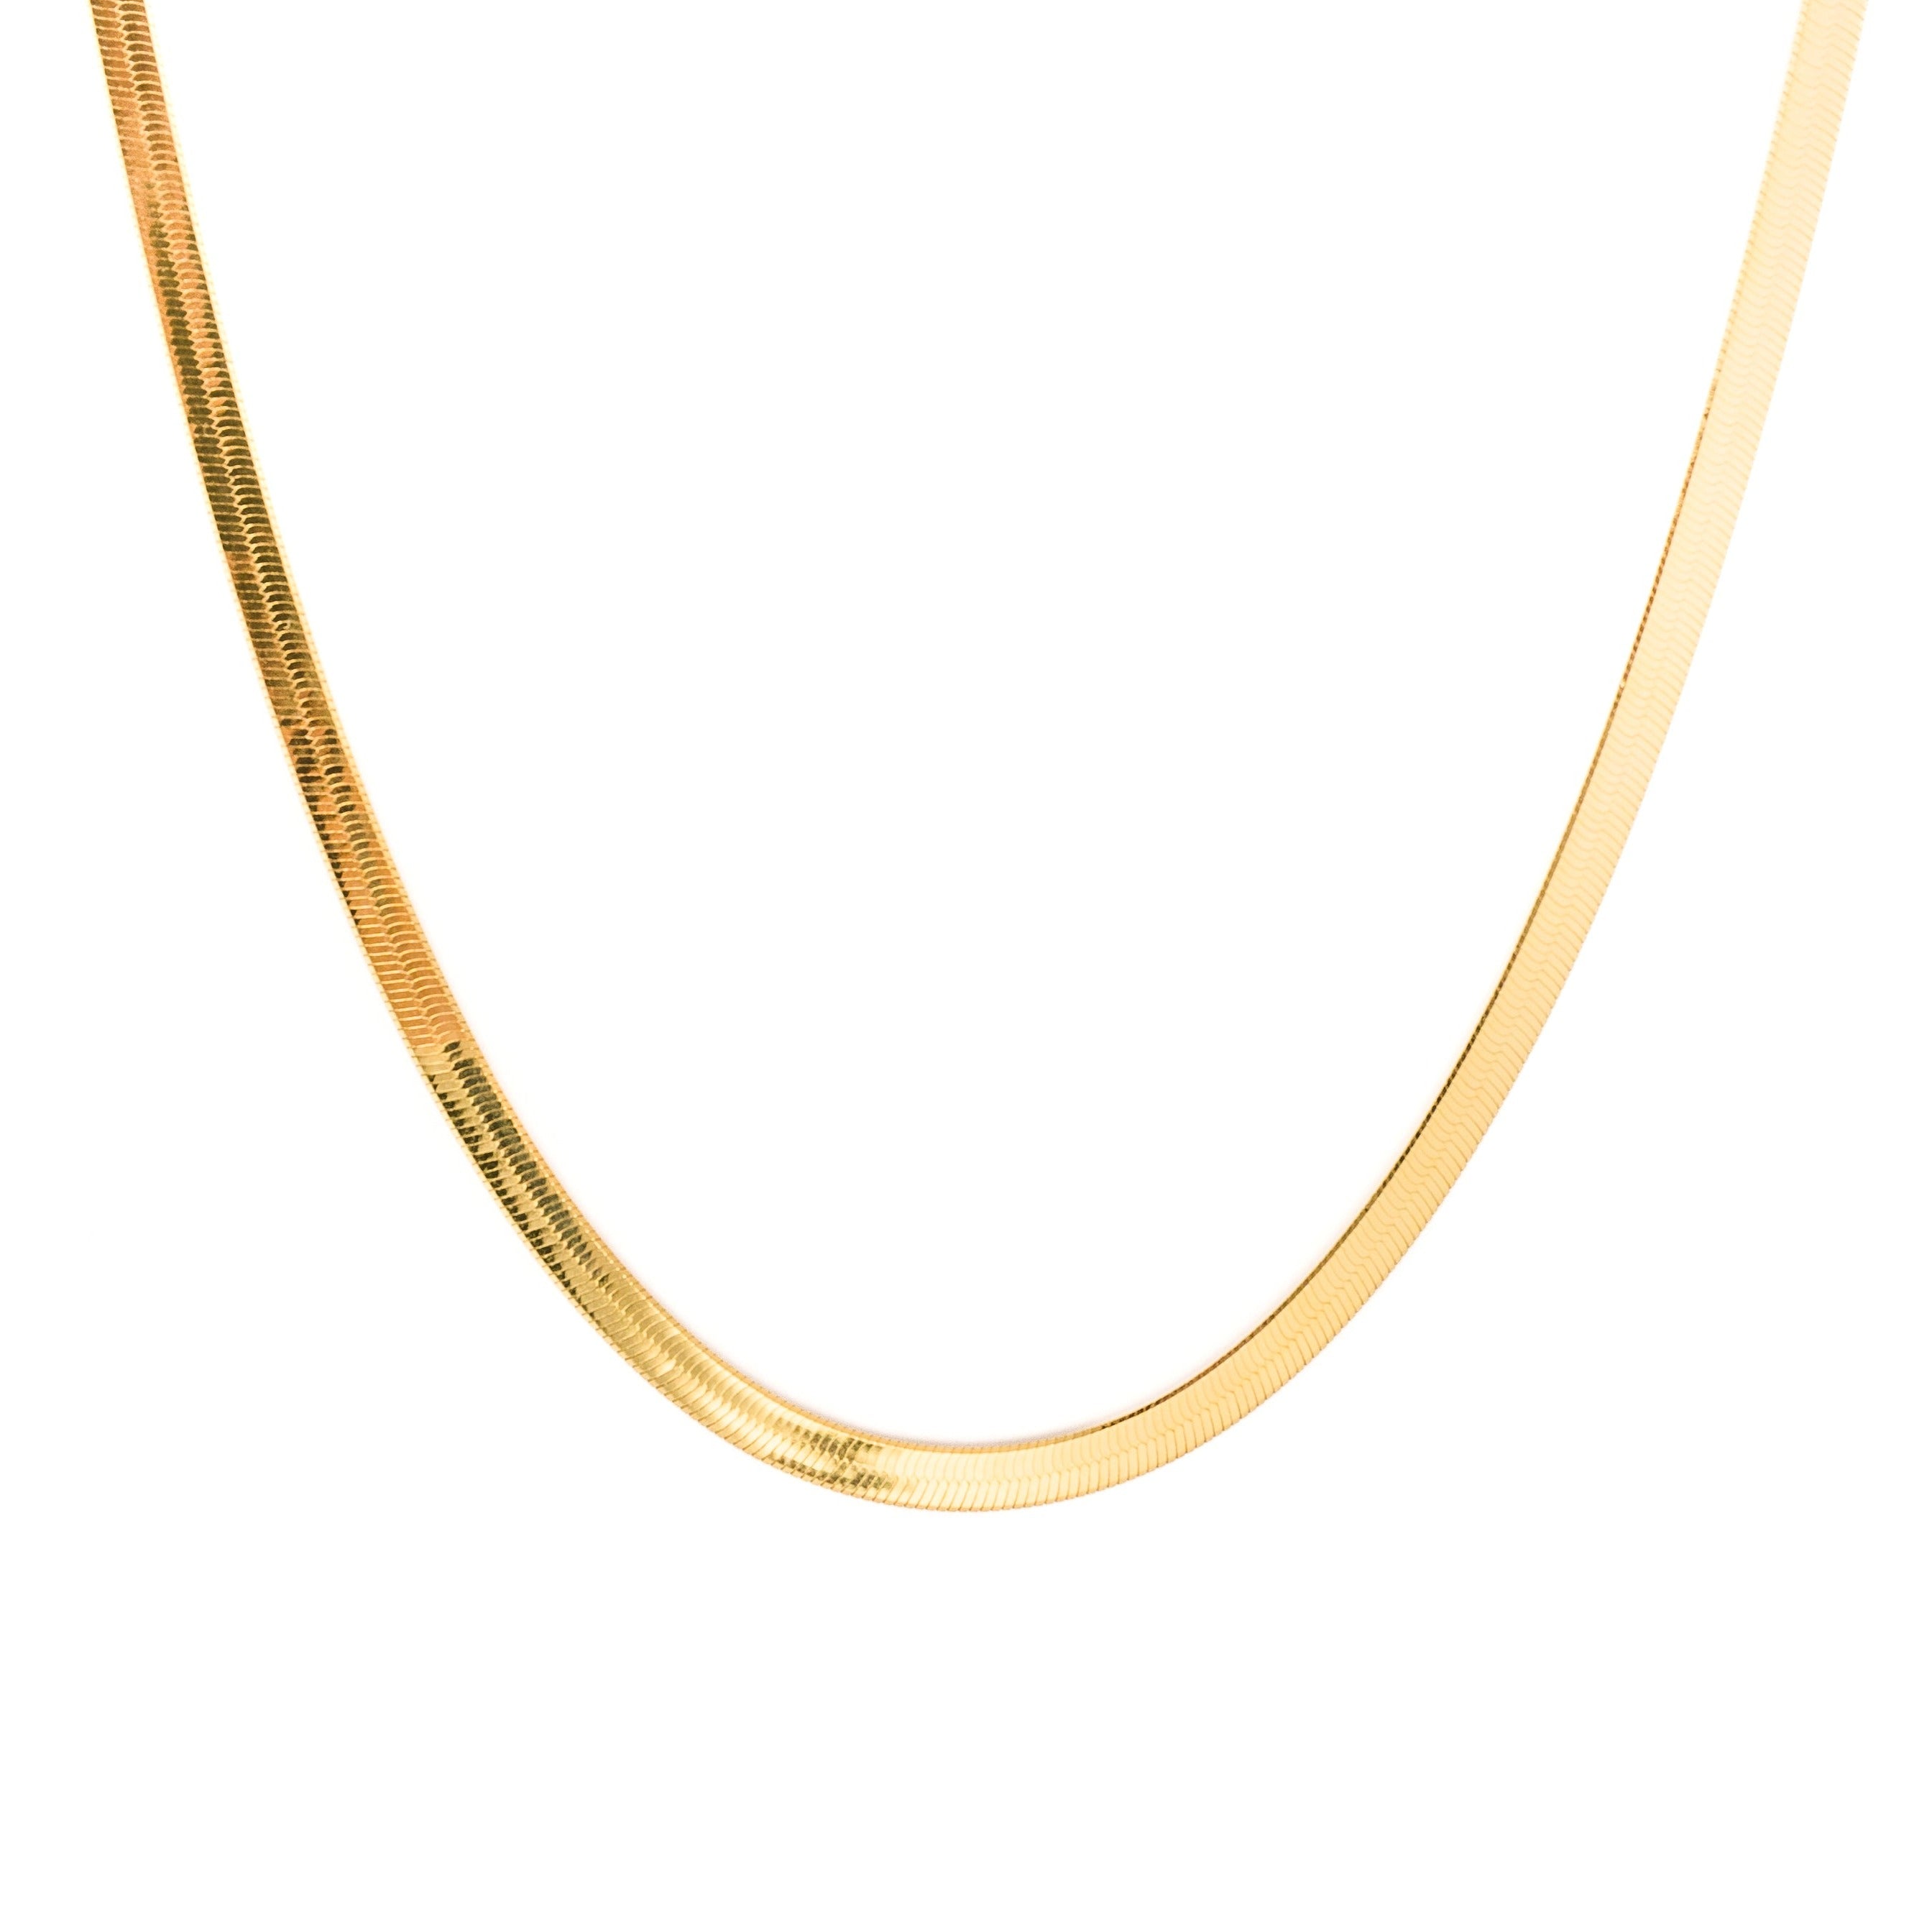 Gold Herringbone Necklace | Herringbone Necklace | Outspoke Official